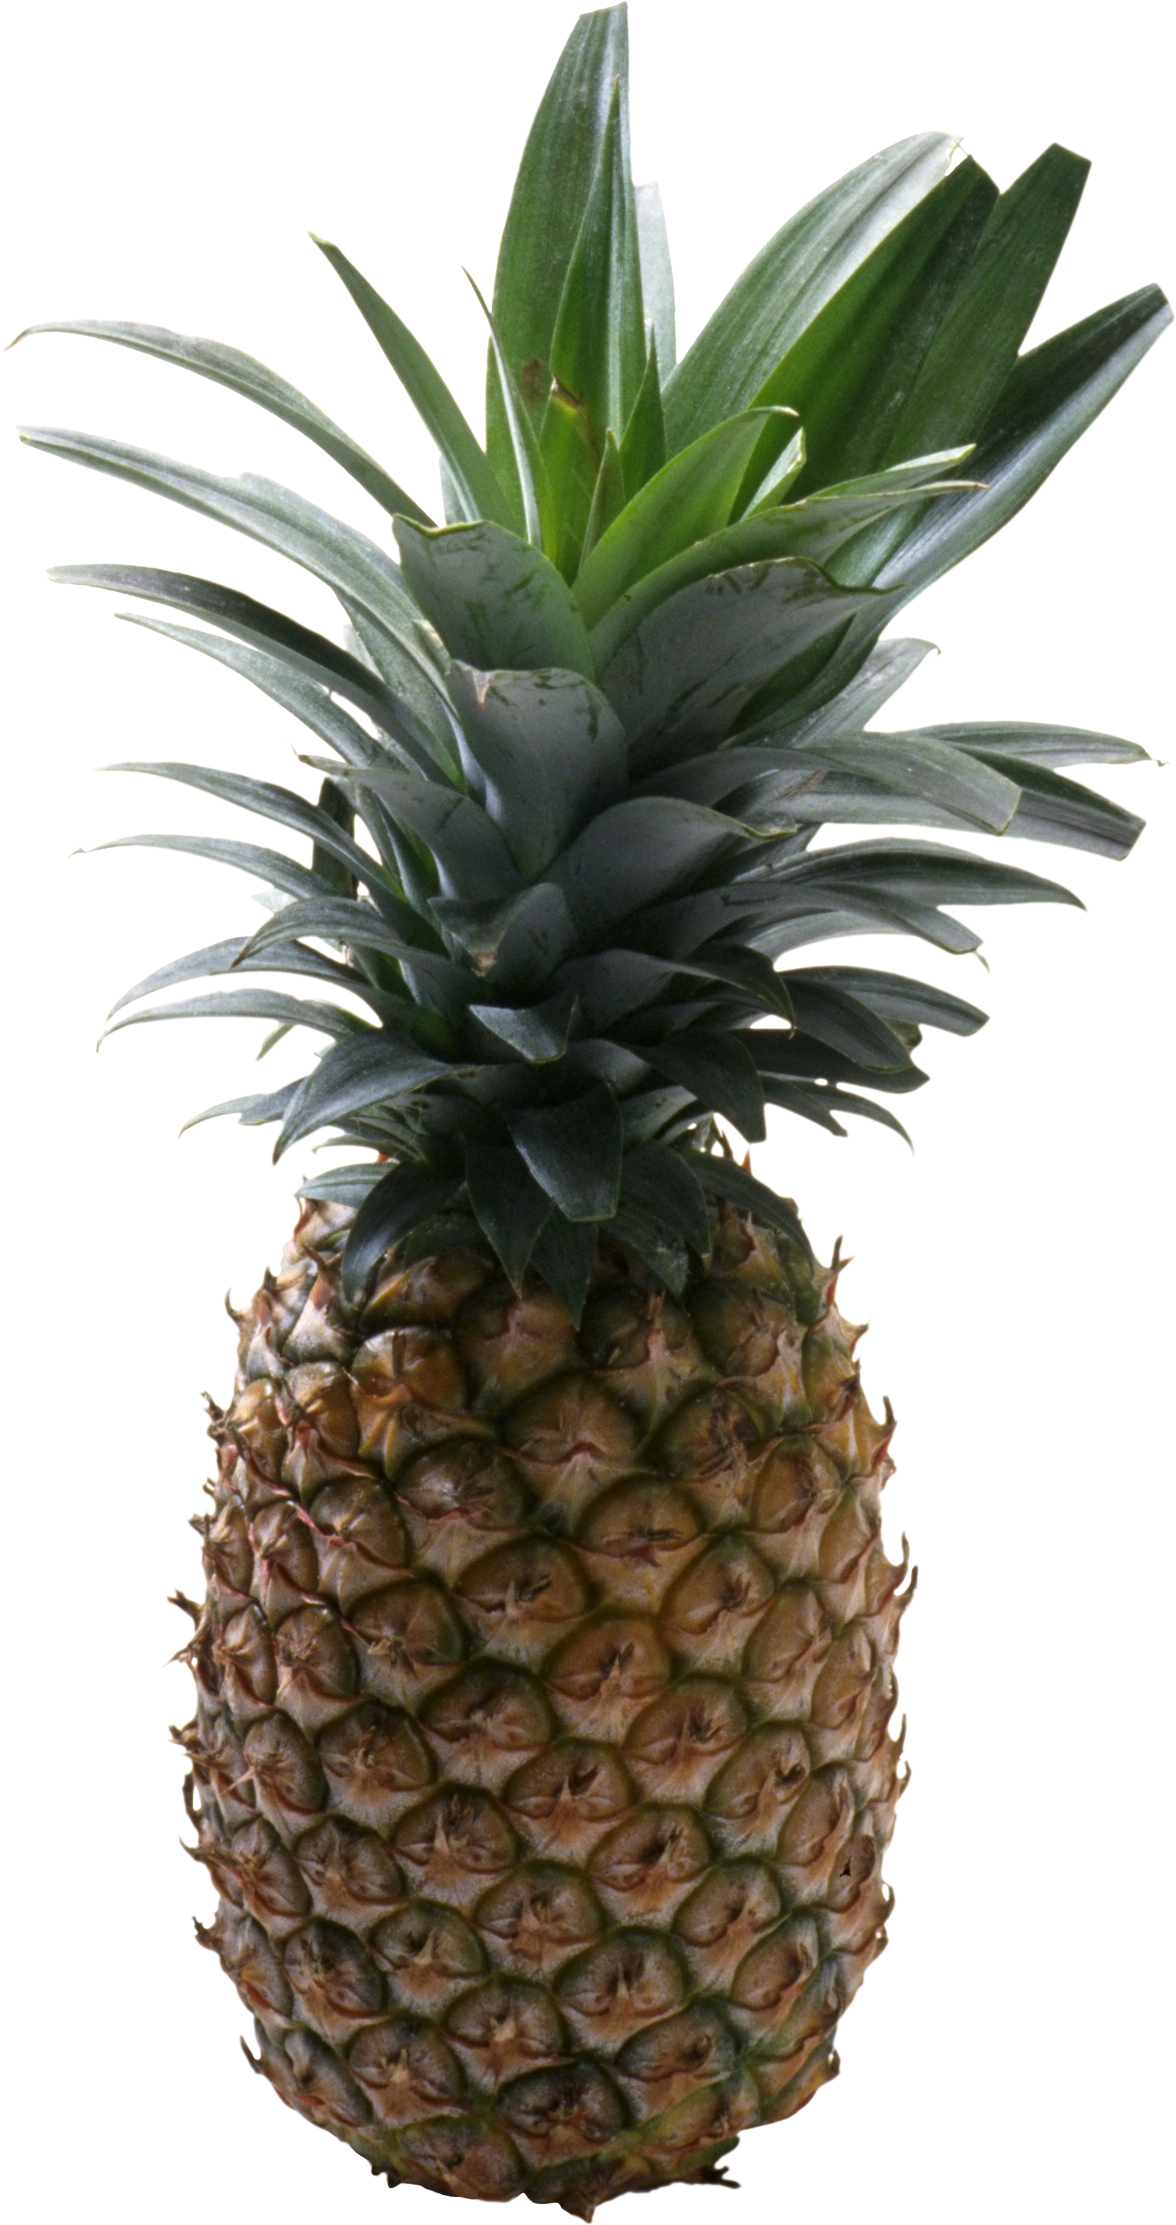 Pineapple fruit PNG image